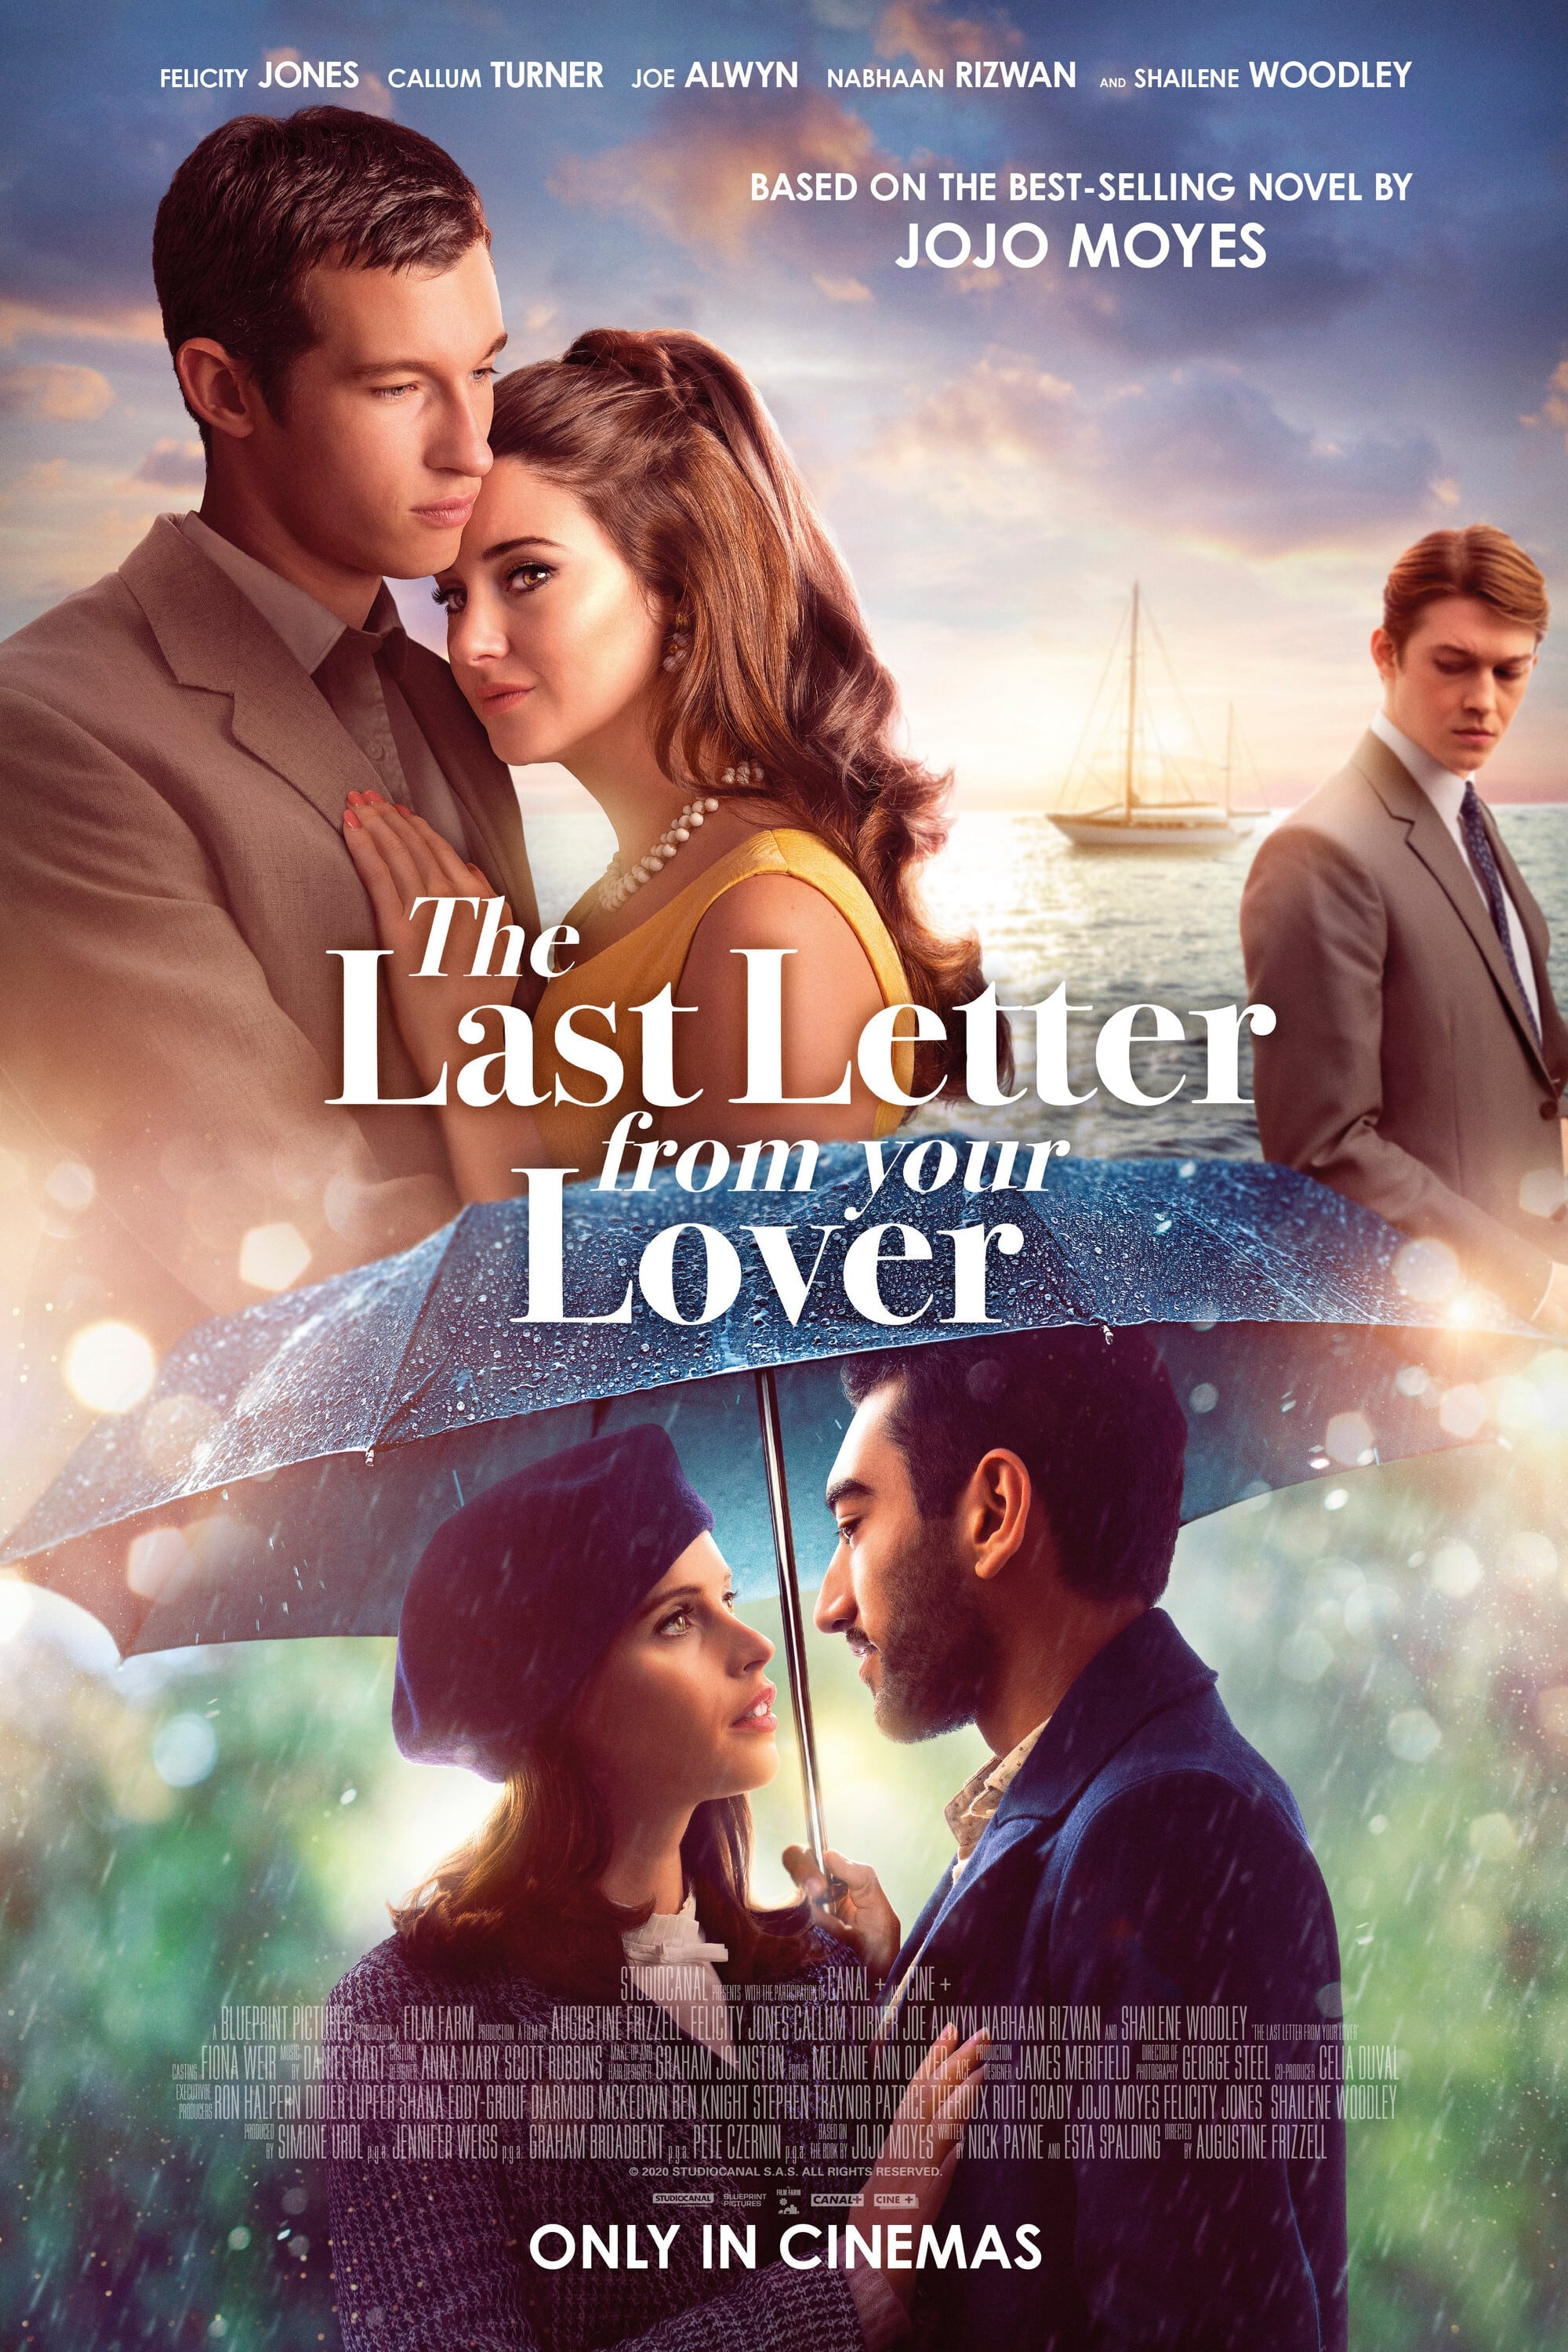 The Last Letter from Your Lover Movie poster